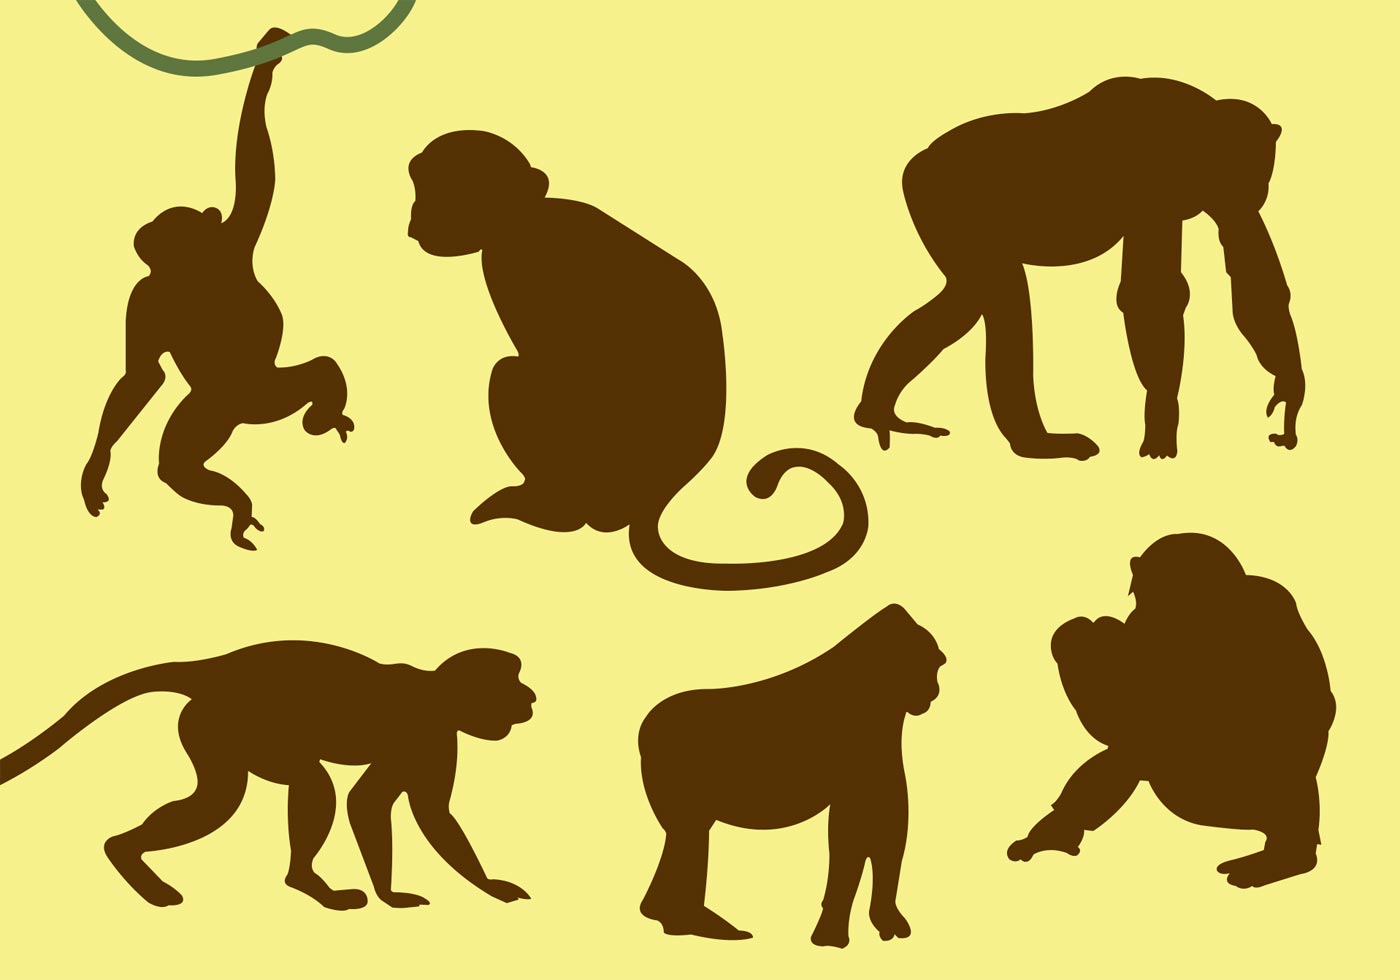 Download Vector Collection of Monkey Silhouettes 92914 - Download ...